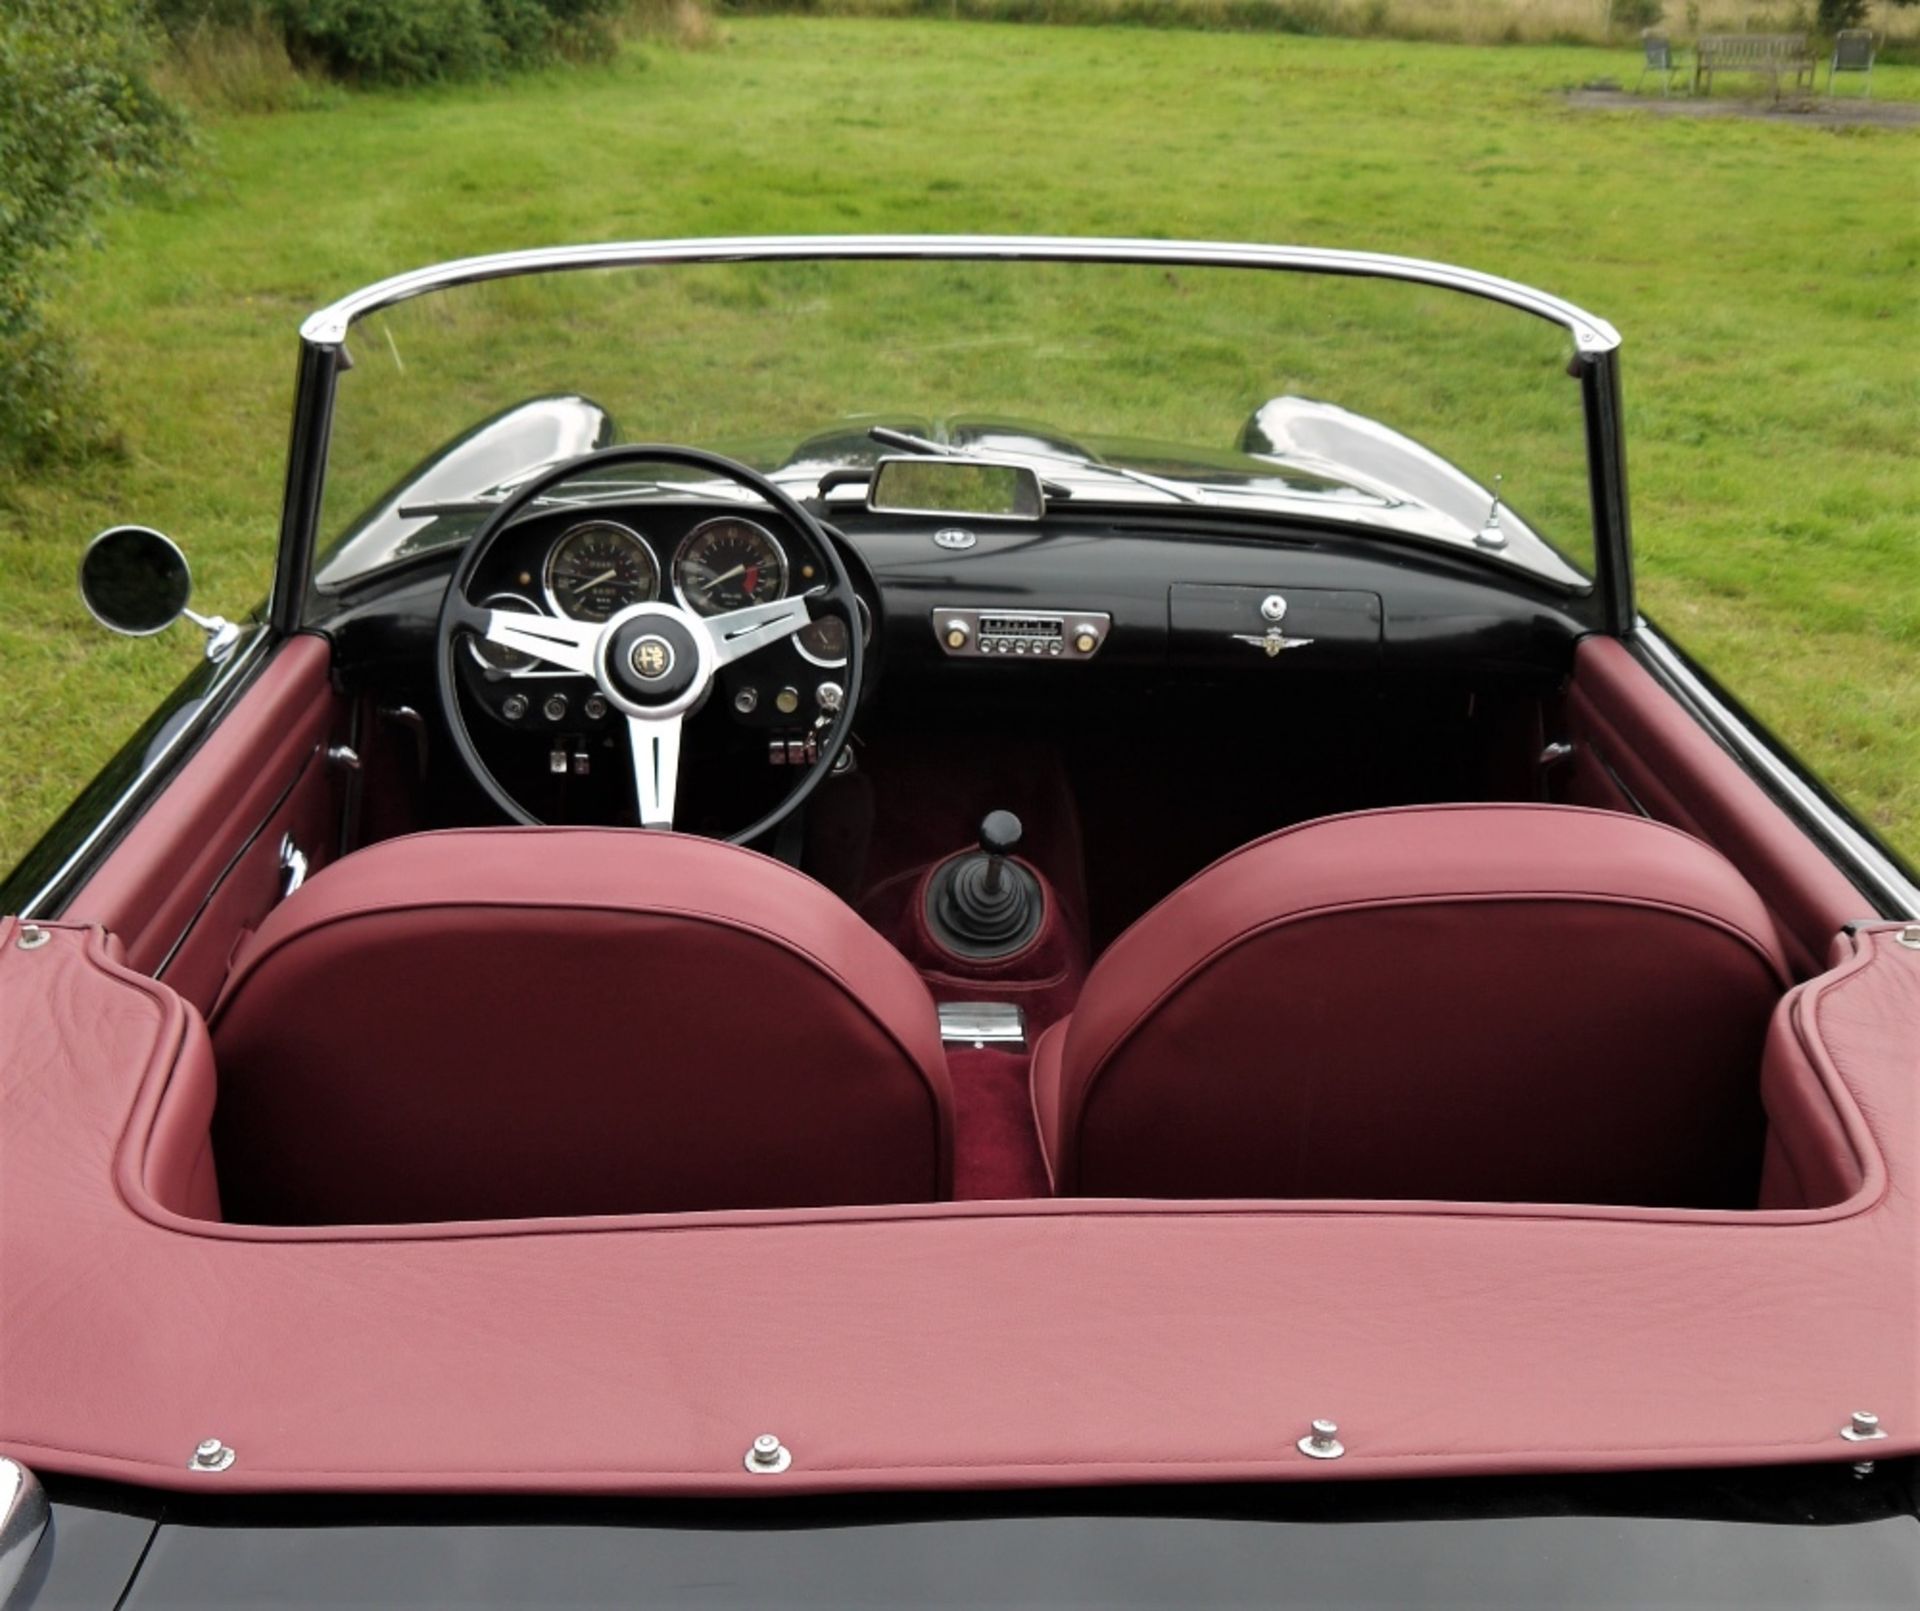 1960 ALFA ROMEO TOURING SPIDER Registration Number: 307 XVJ Chassis Number: AR*10204*000517 Recorded - Image 31 of 36